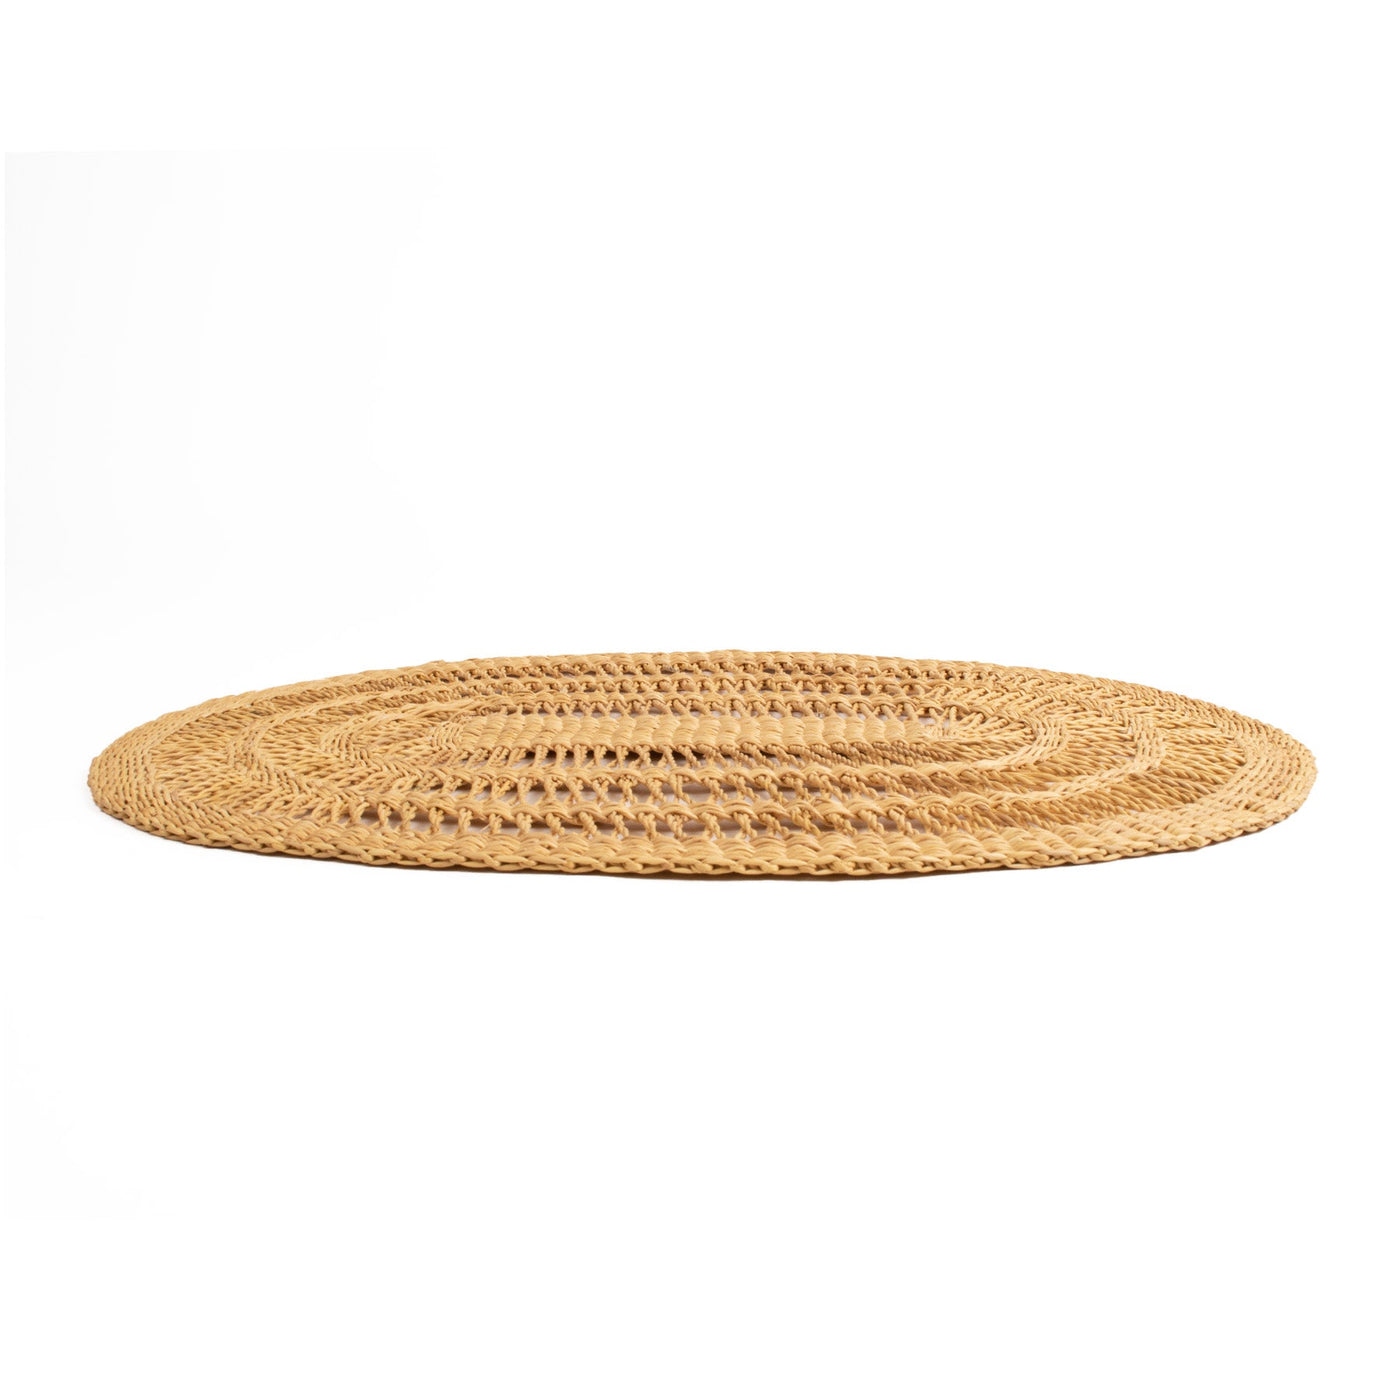 Neutral Placemats - 20" Laced Oval, Set of 2